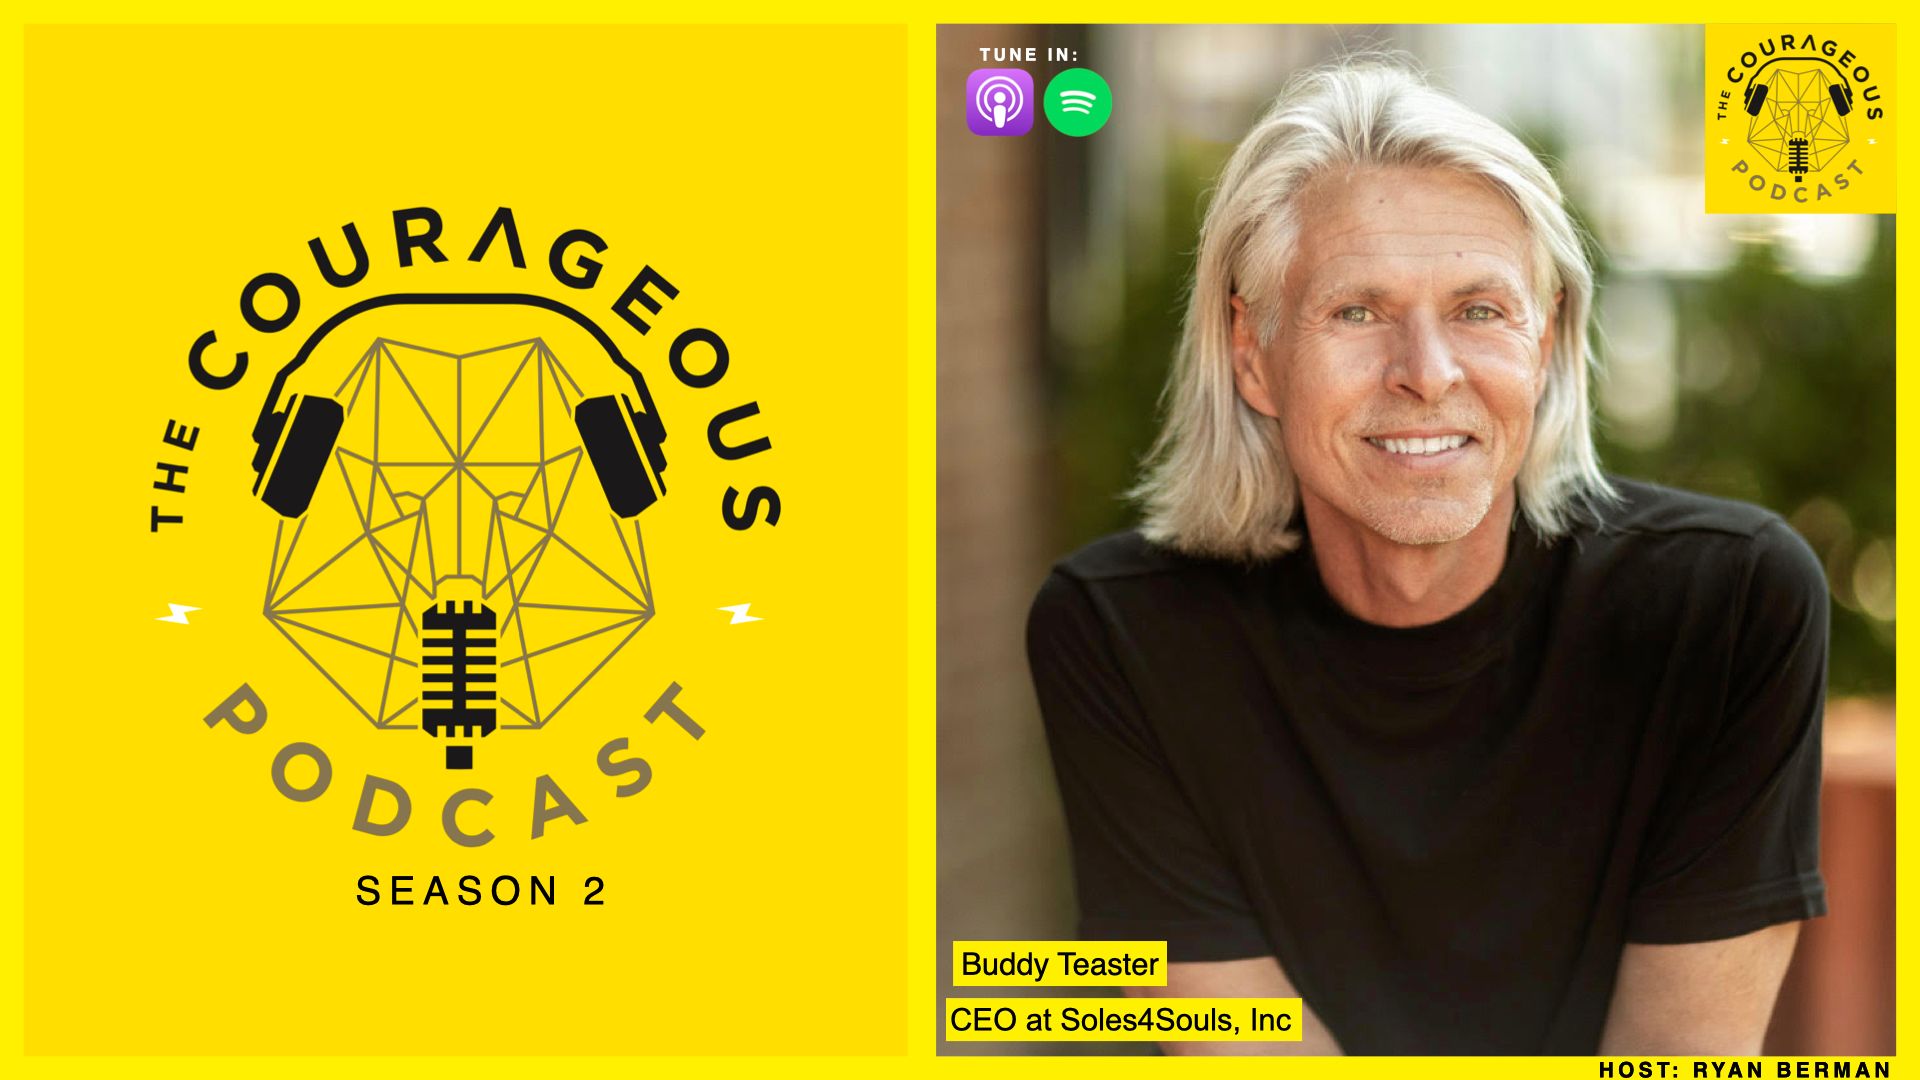 EP114 Buddy Teaster - CEO at Soles4Souls, Inc.